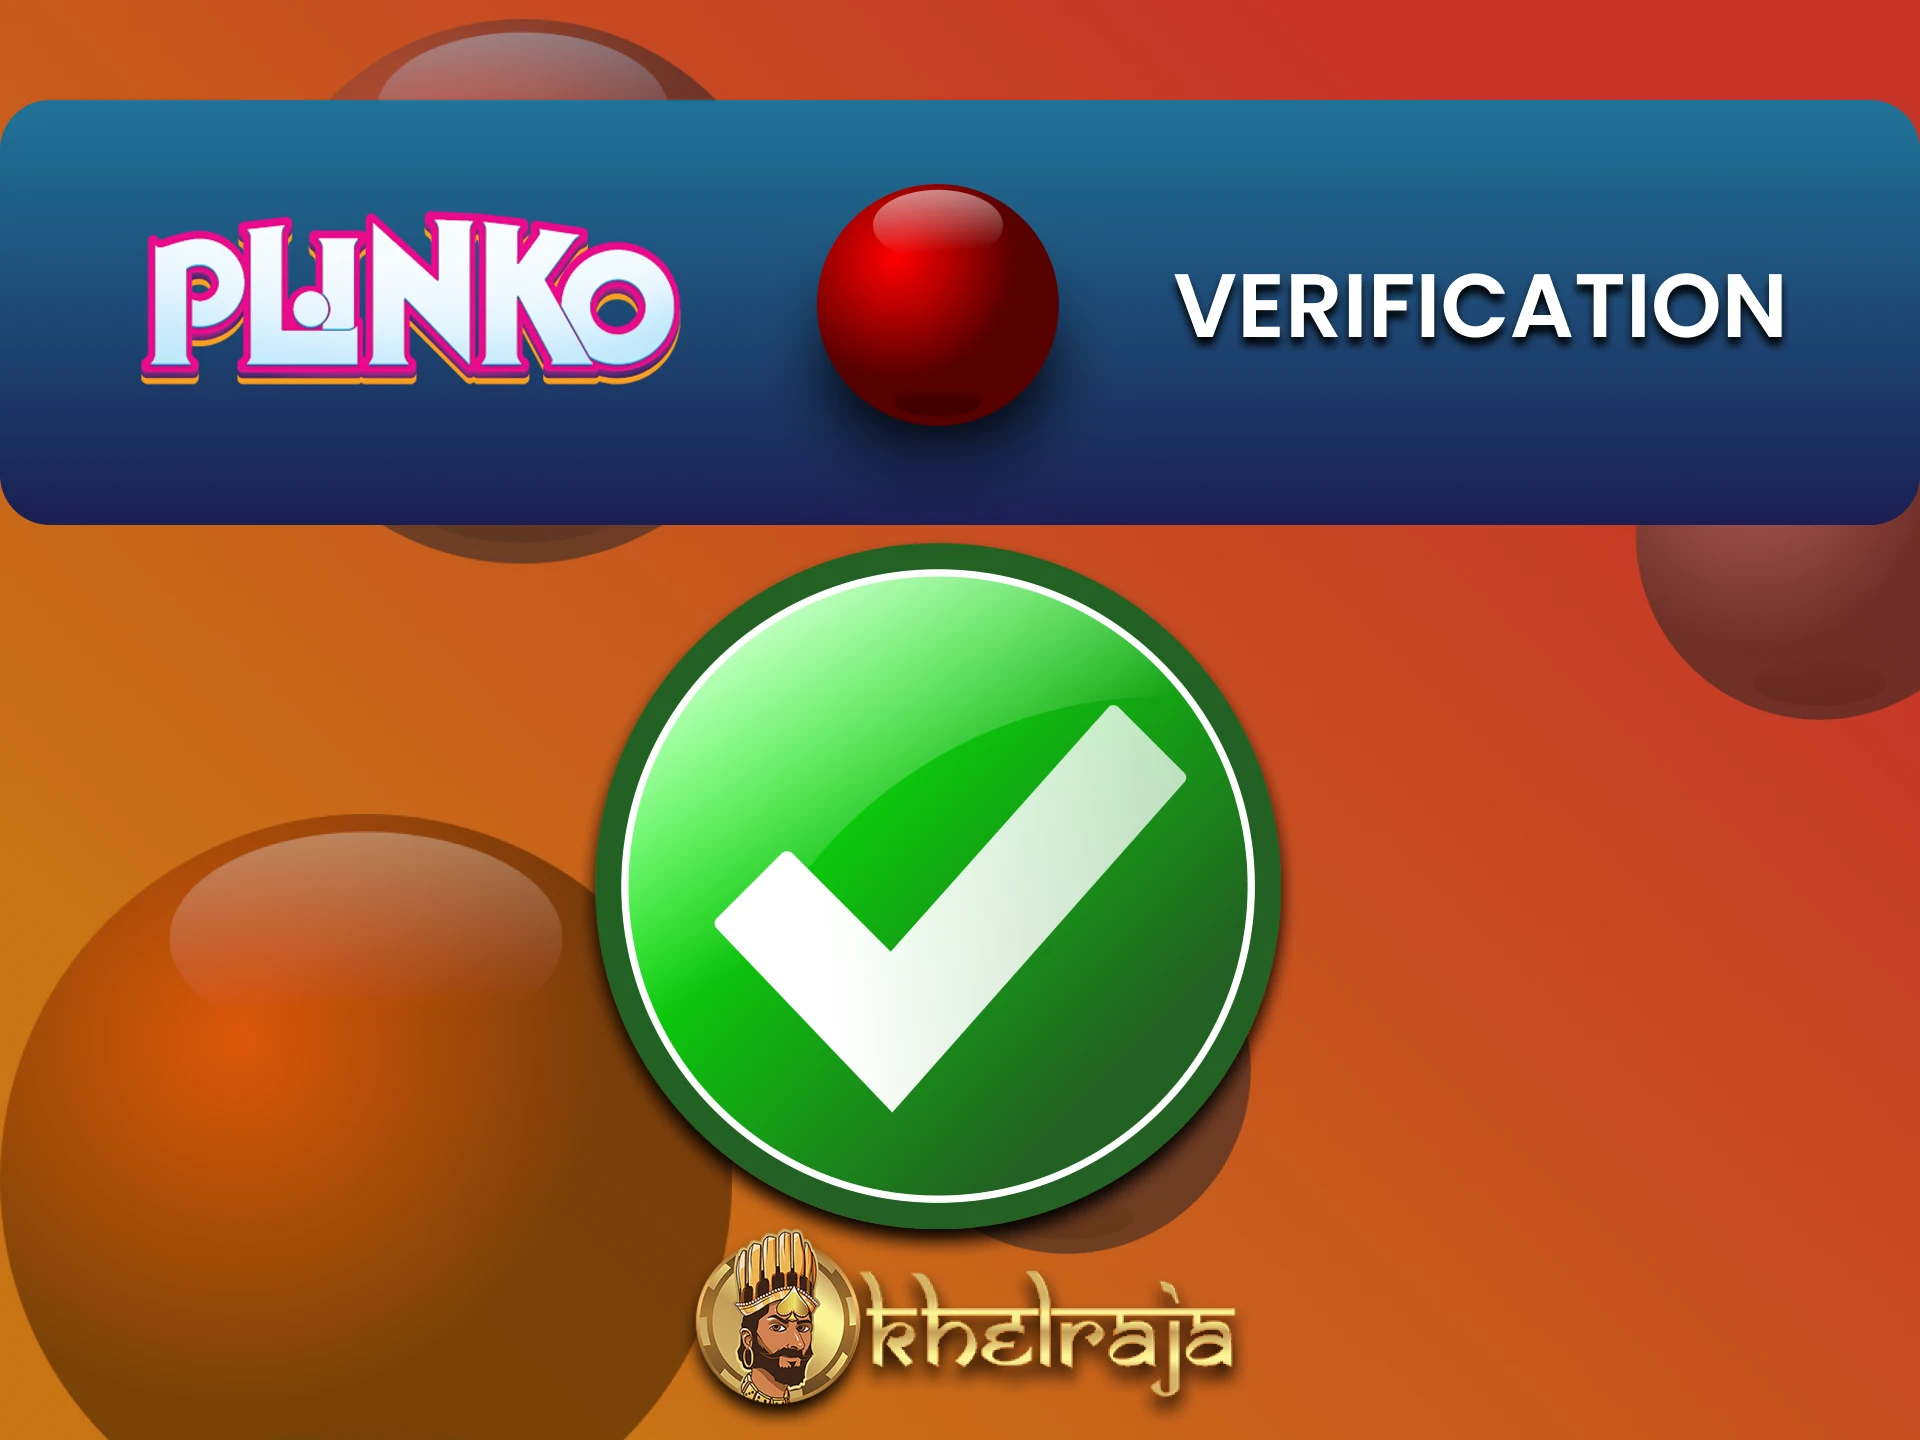 Fill out the details in your Khelraja account to play Plinko.